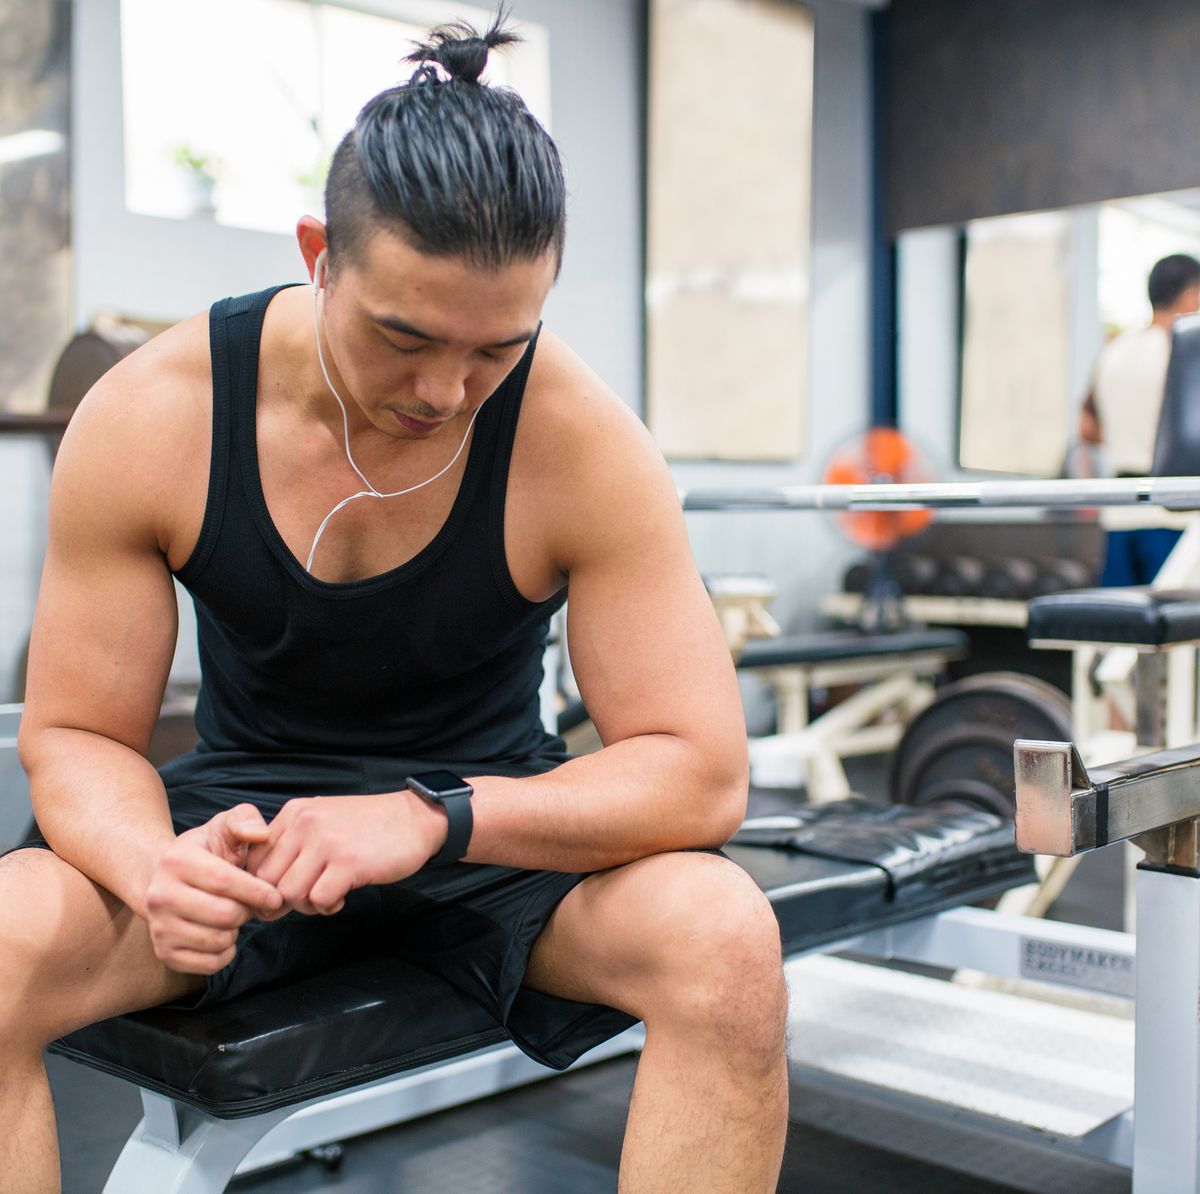 How Long To Rest Between Sets & Exercises For Fitness